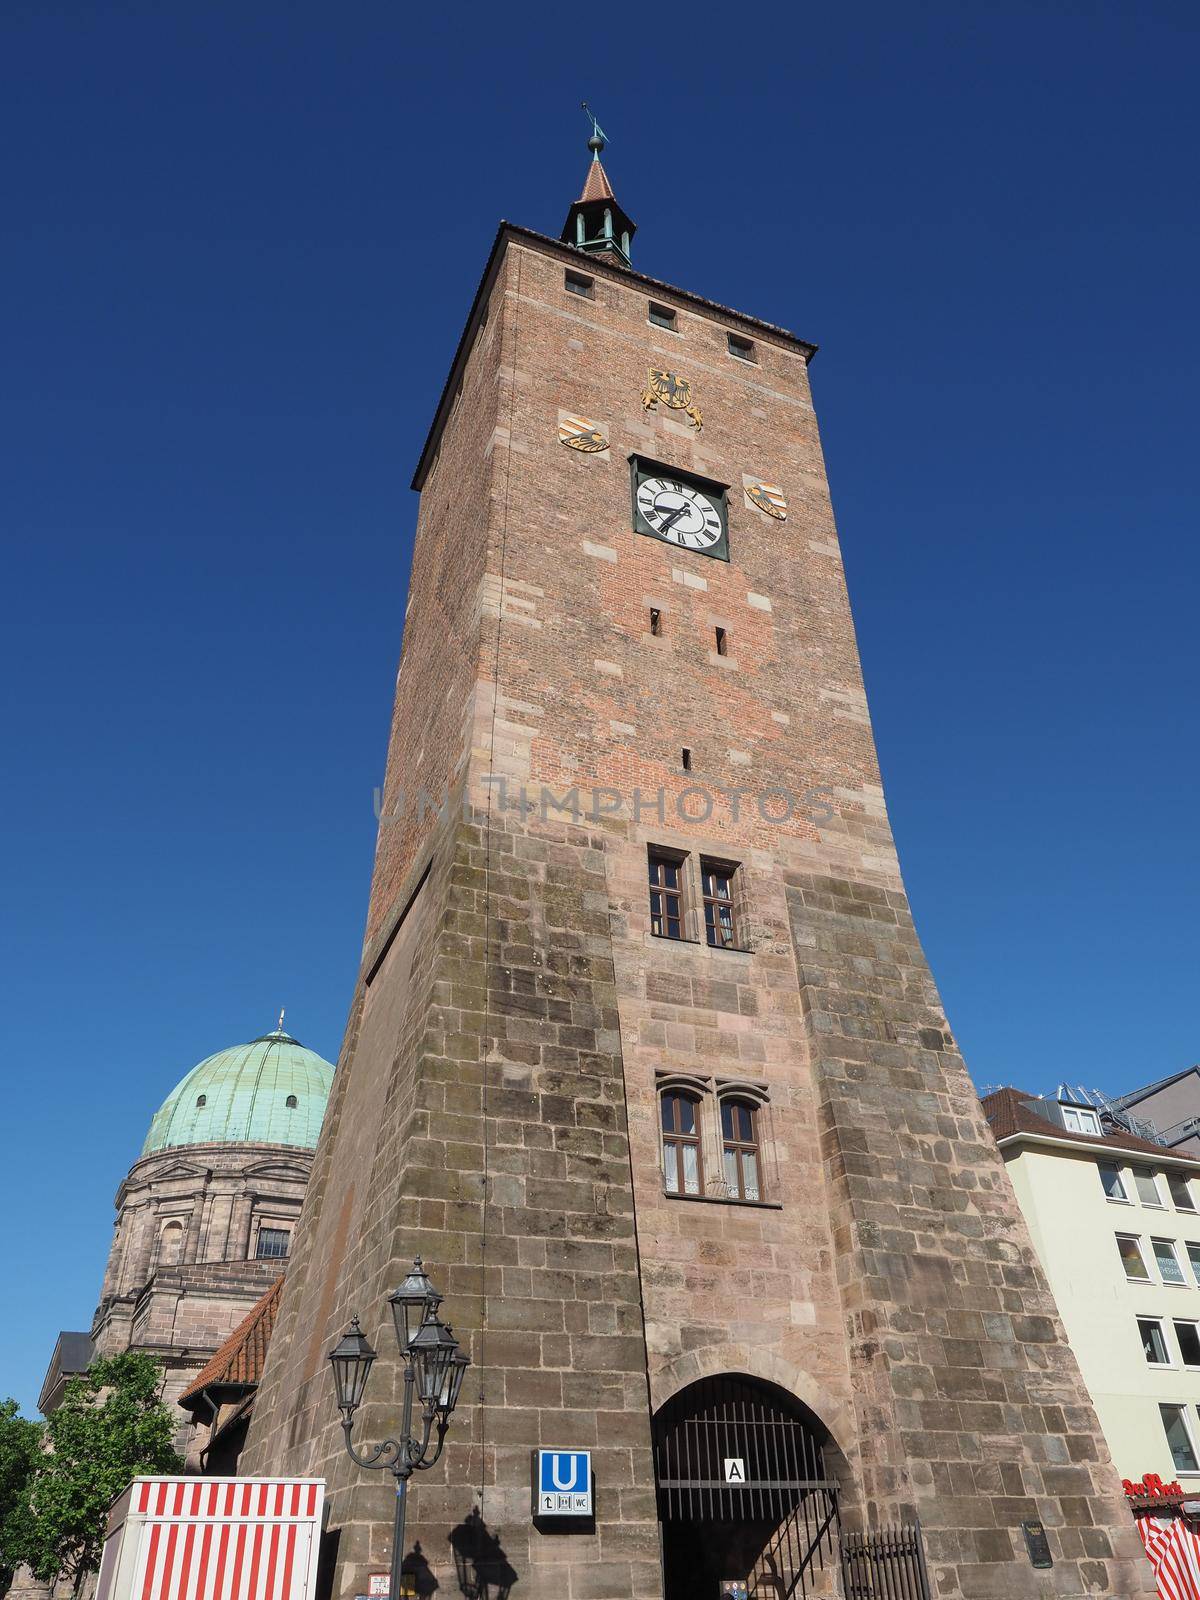 Weisser Turm translation white tower in Nuernberg, Germany